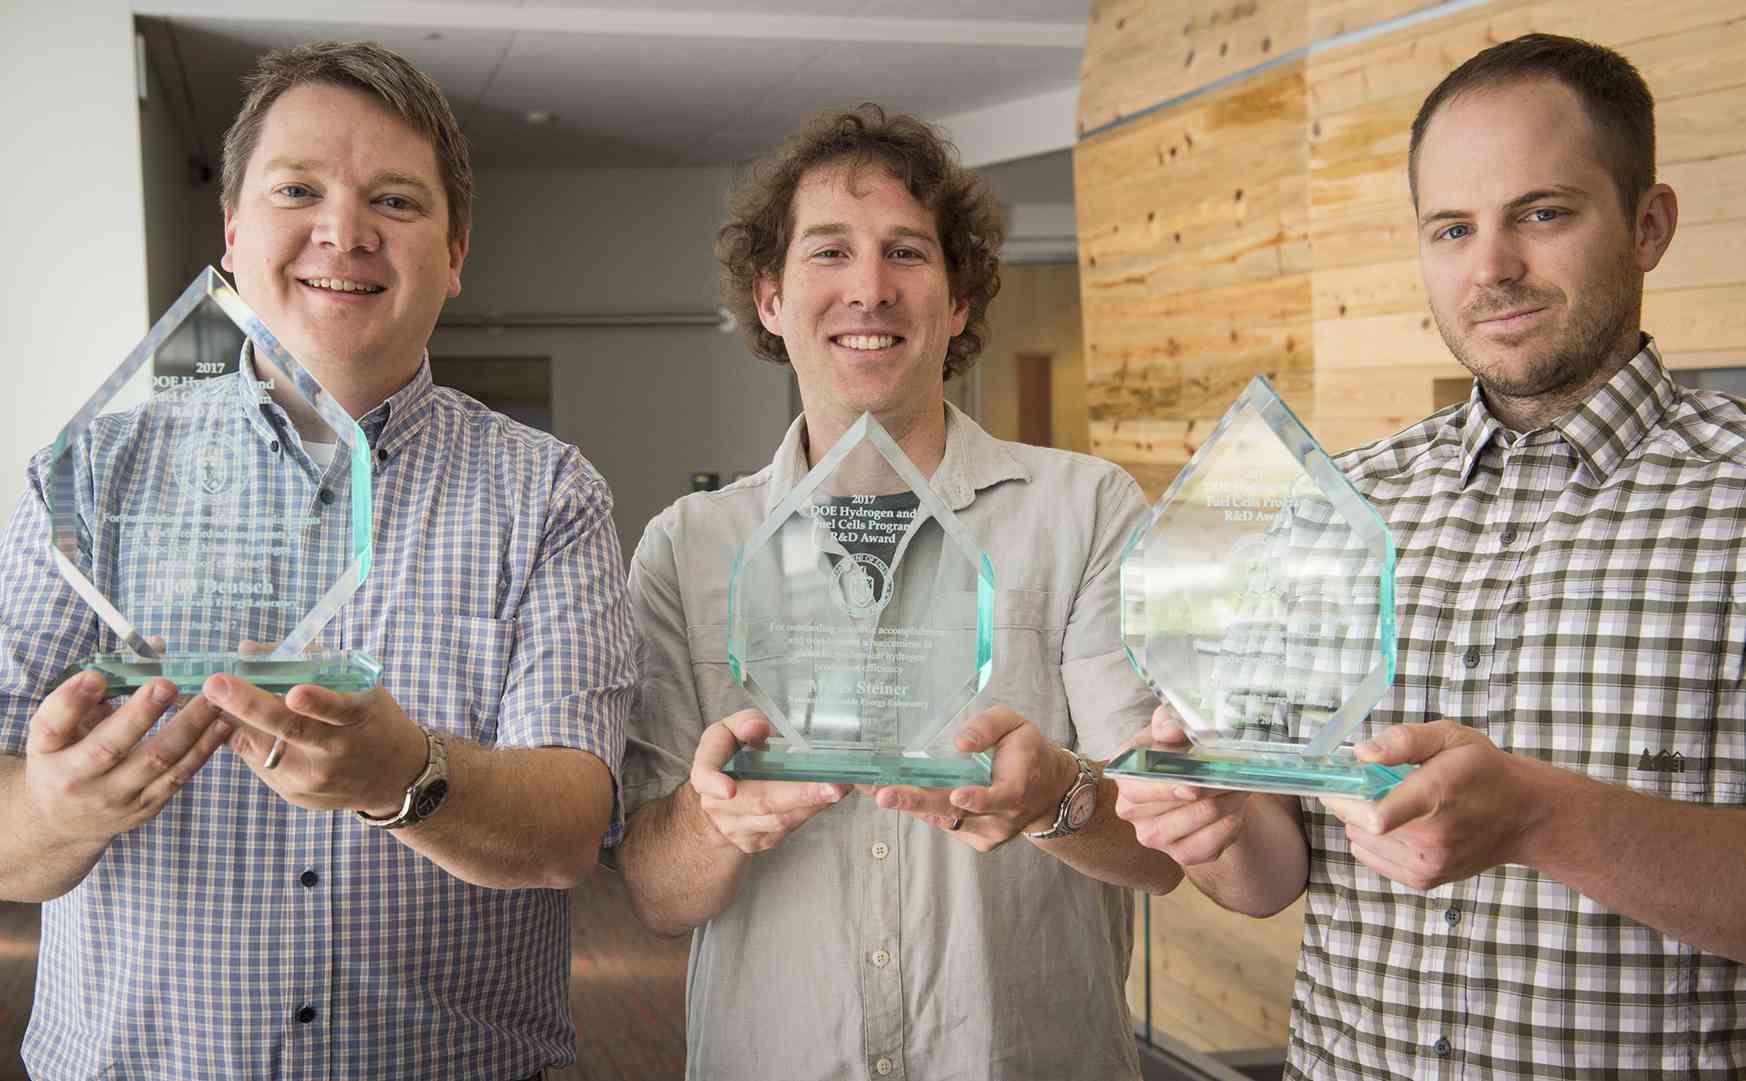 Todd Deutsch, Myles Steiner, and James Young pose with their Annual Merit Review awards